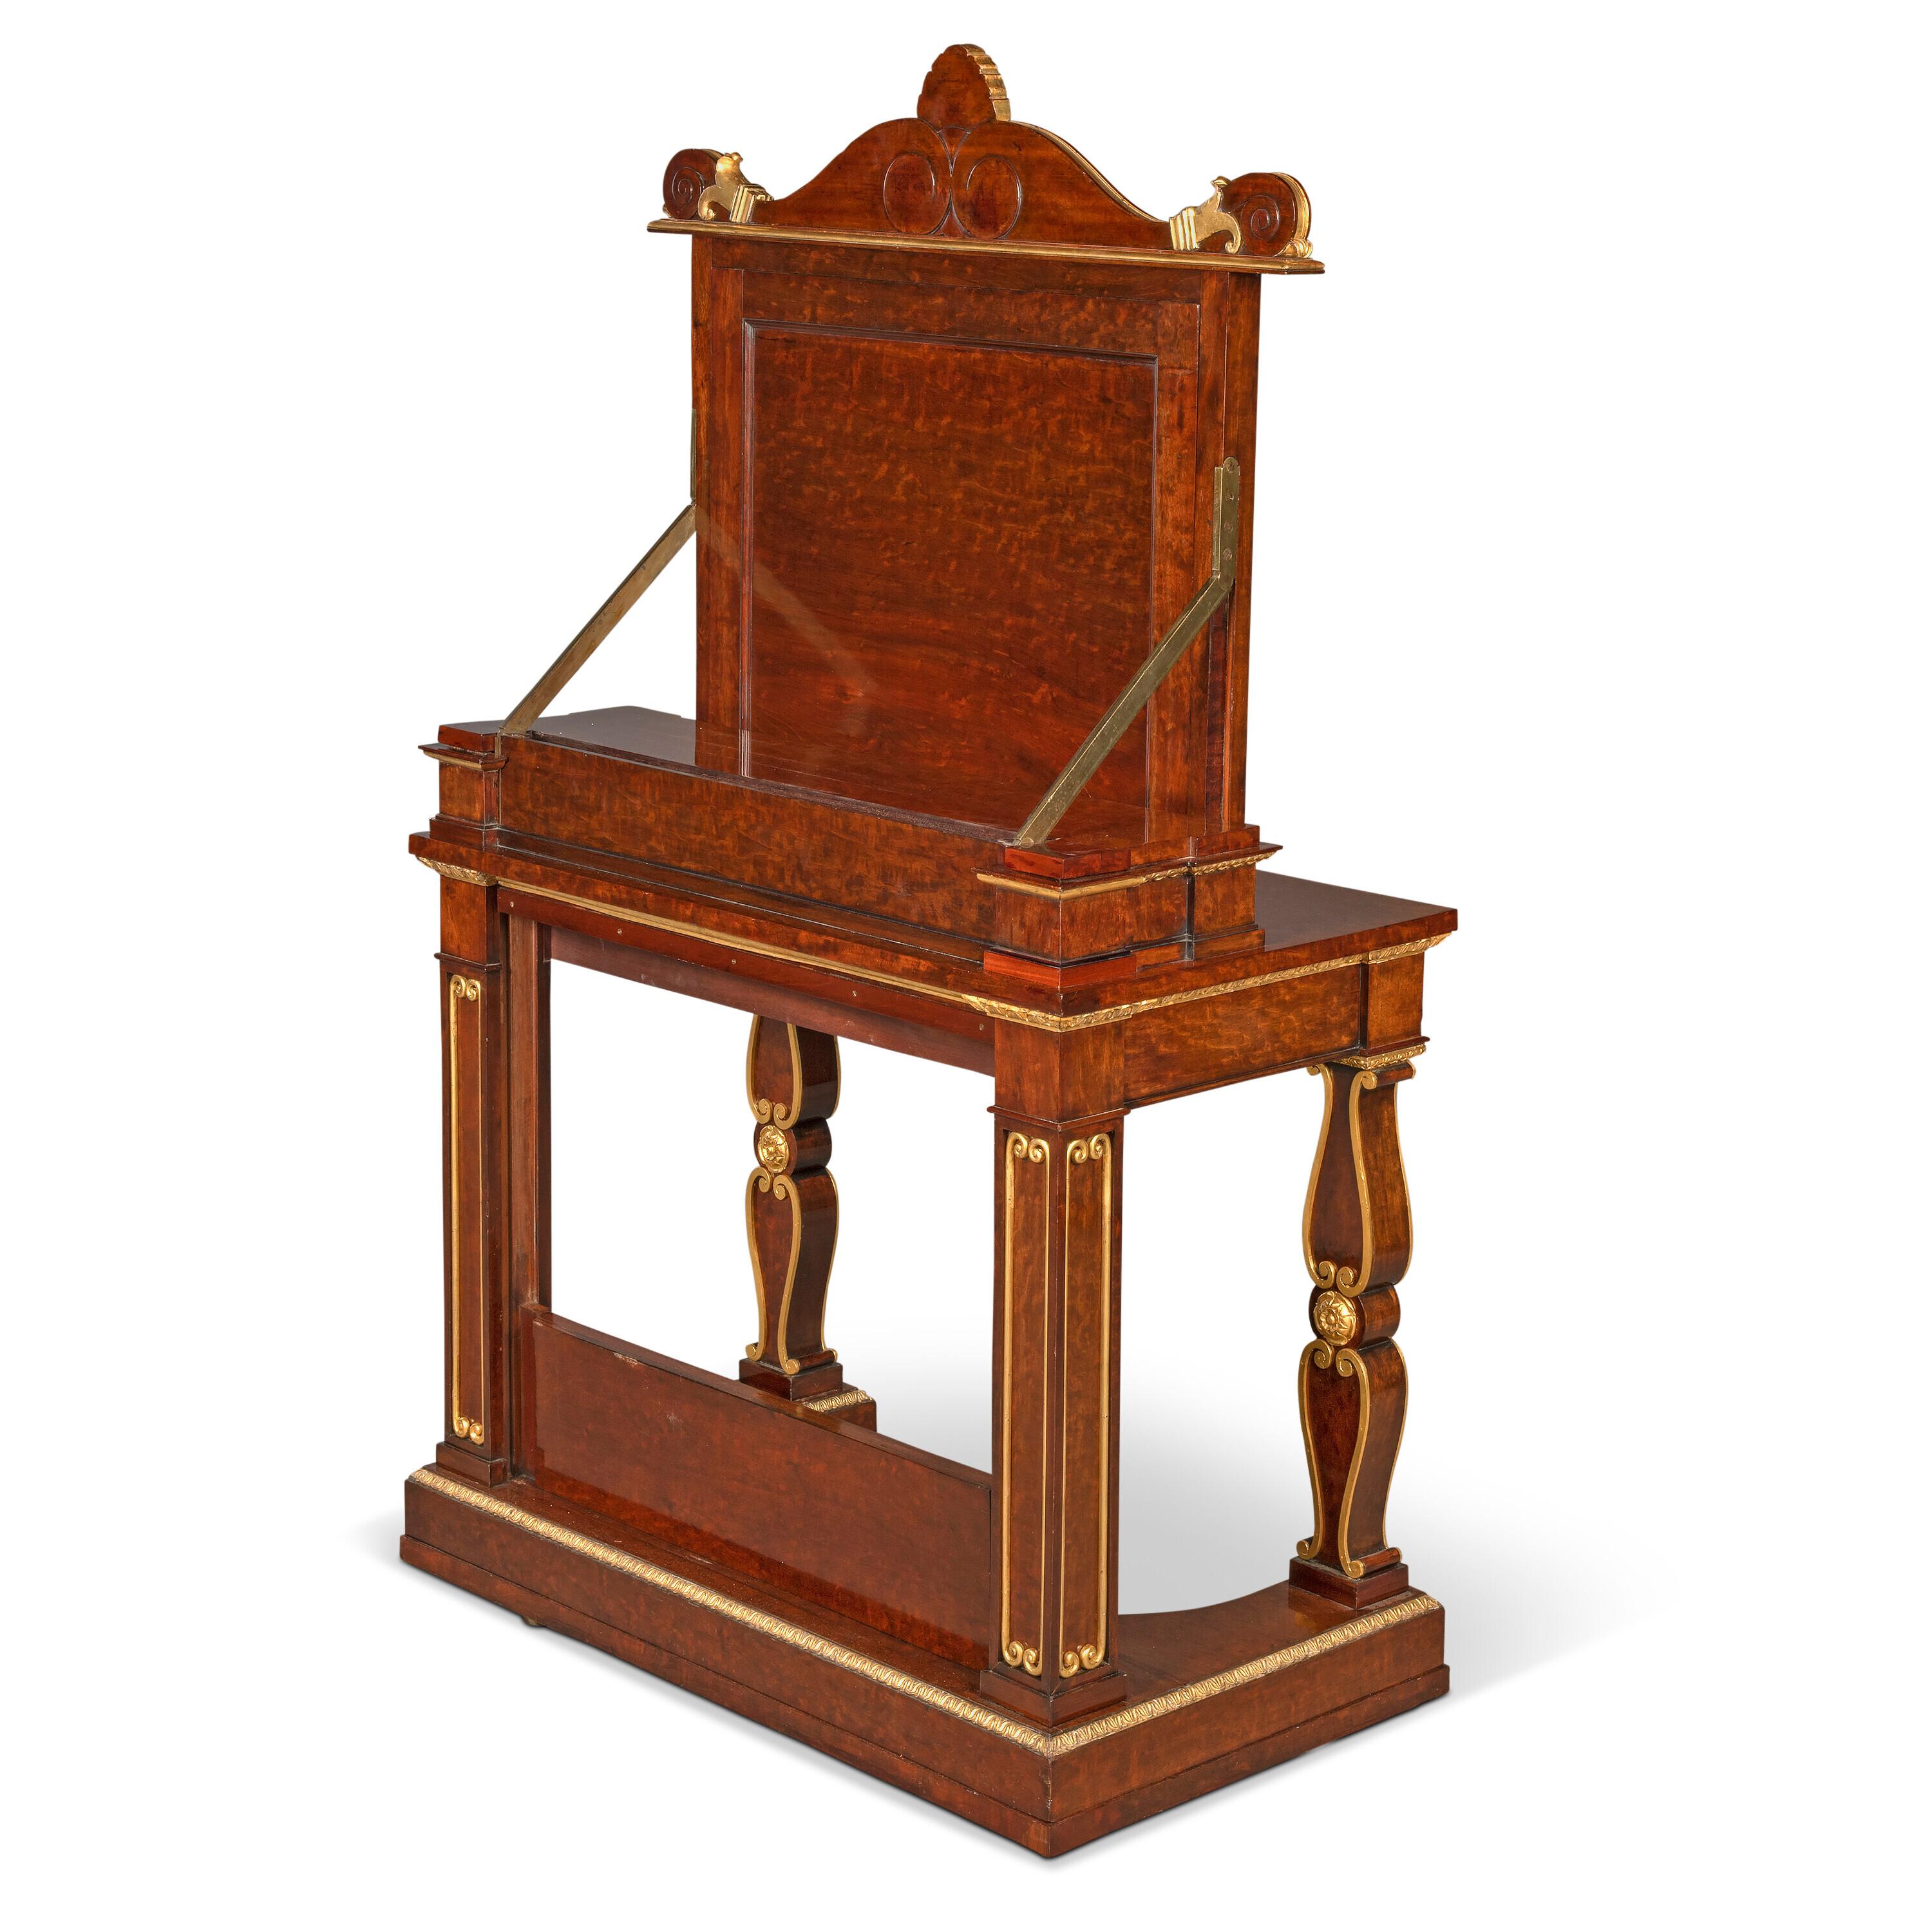  An Exceptional English Regency Dressing Table with a Royal Family Provenance 1